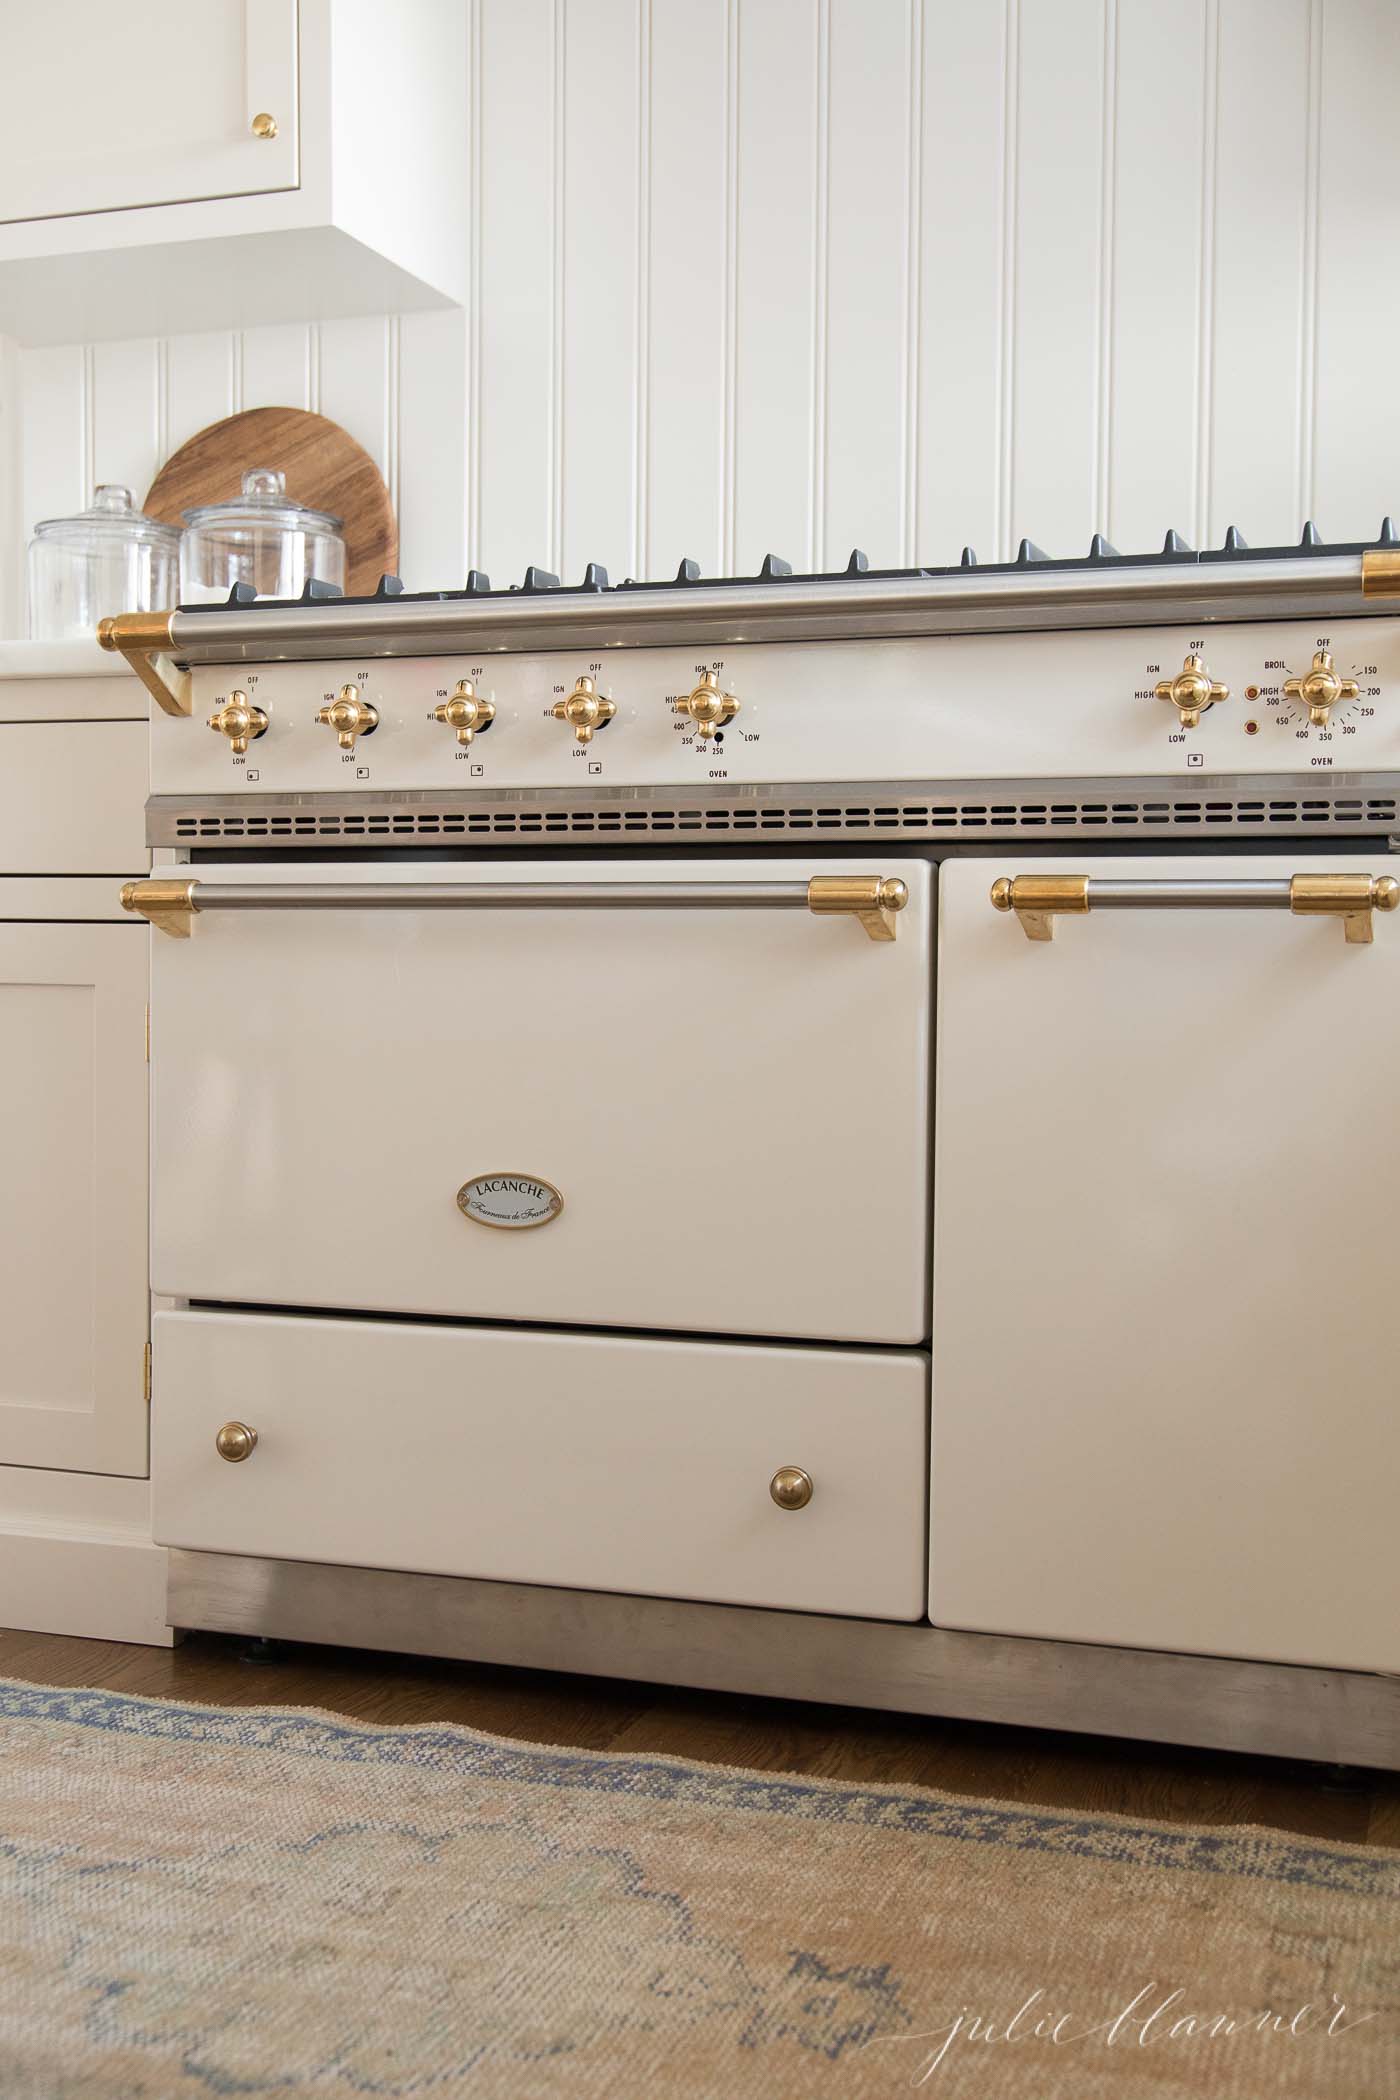 An ivory la canche french stove with brass hardware